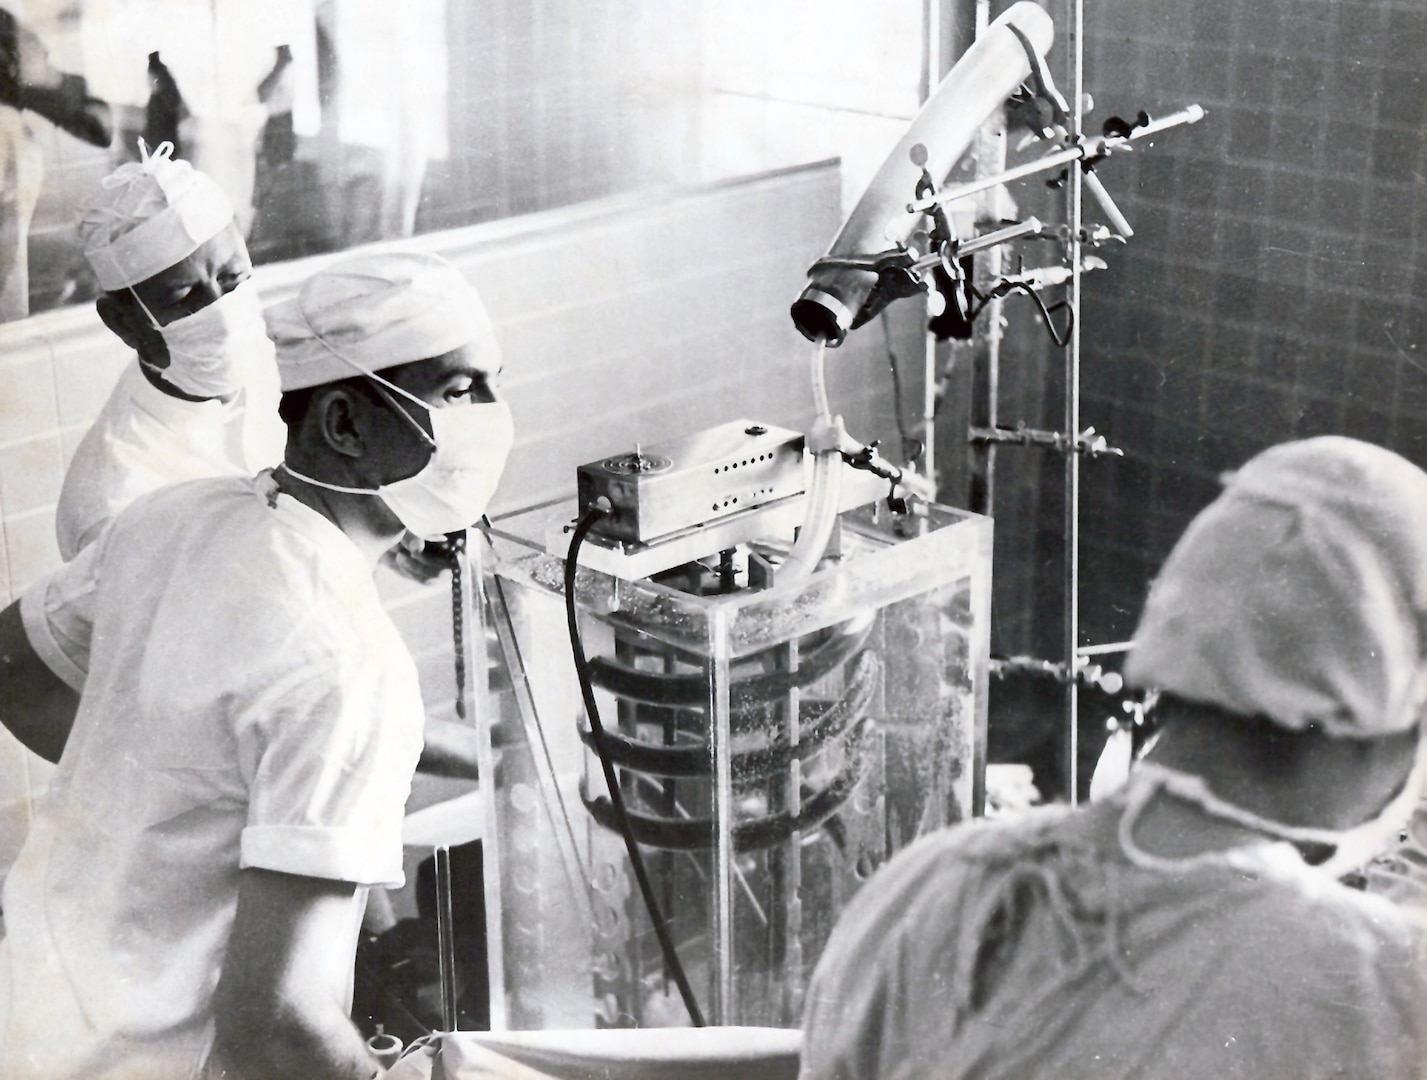 Capt. Floyd Baker (center), first-year surgical resident, using the pump-oxygenator to close an atrial septal defect during a surgery at Fitzsimons Army Hospital, Colo., in 1956.